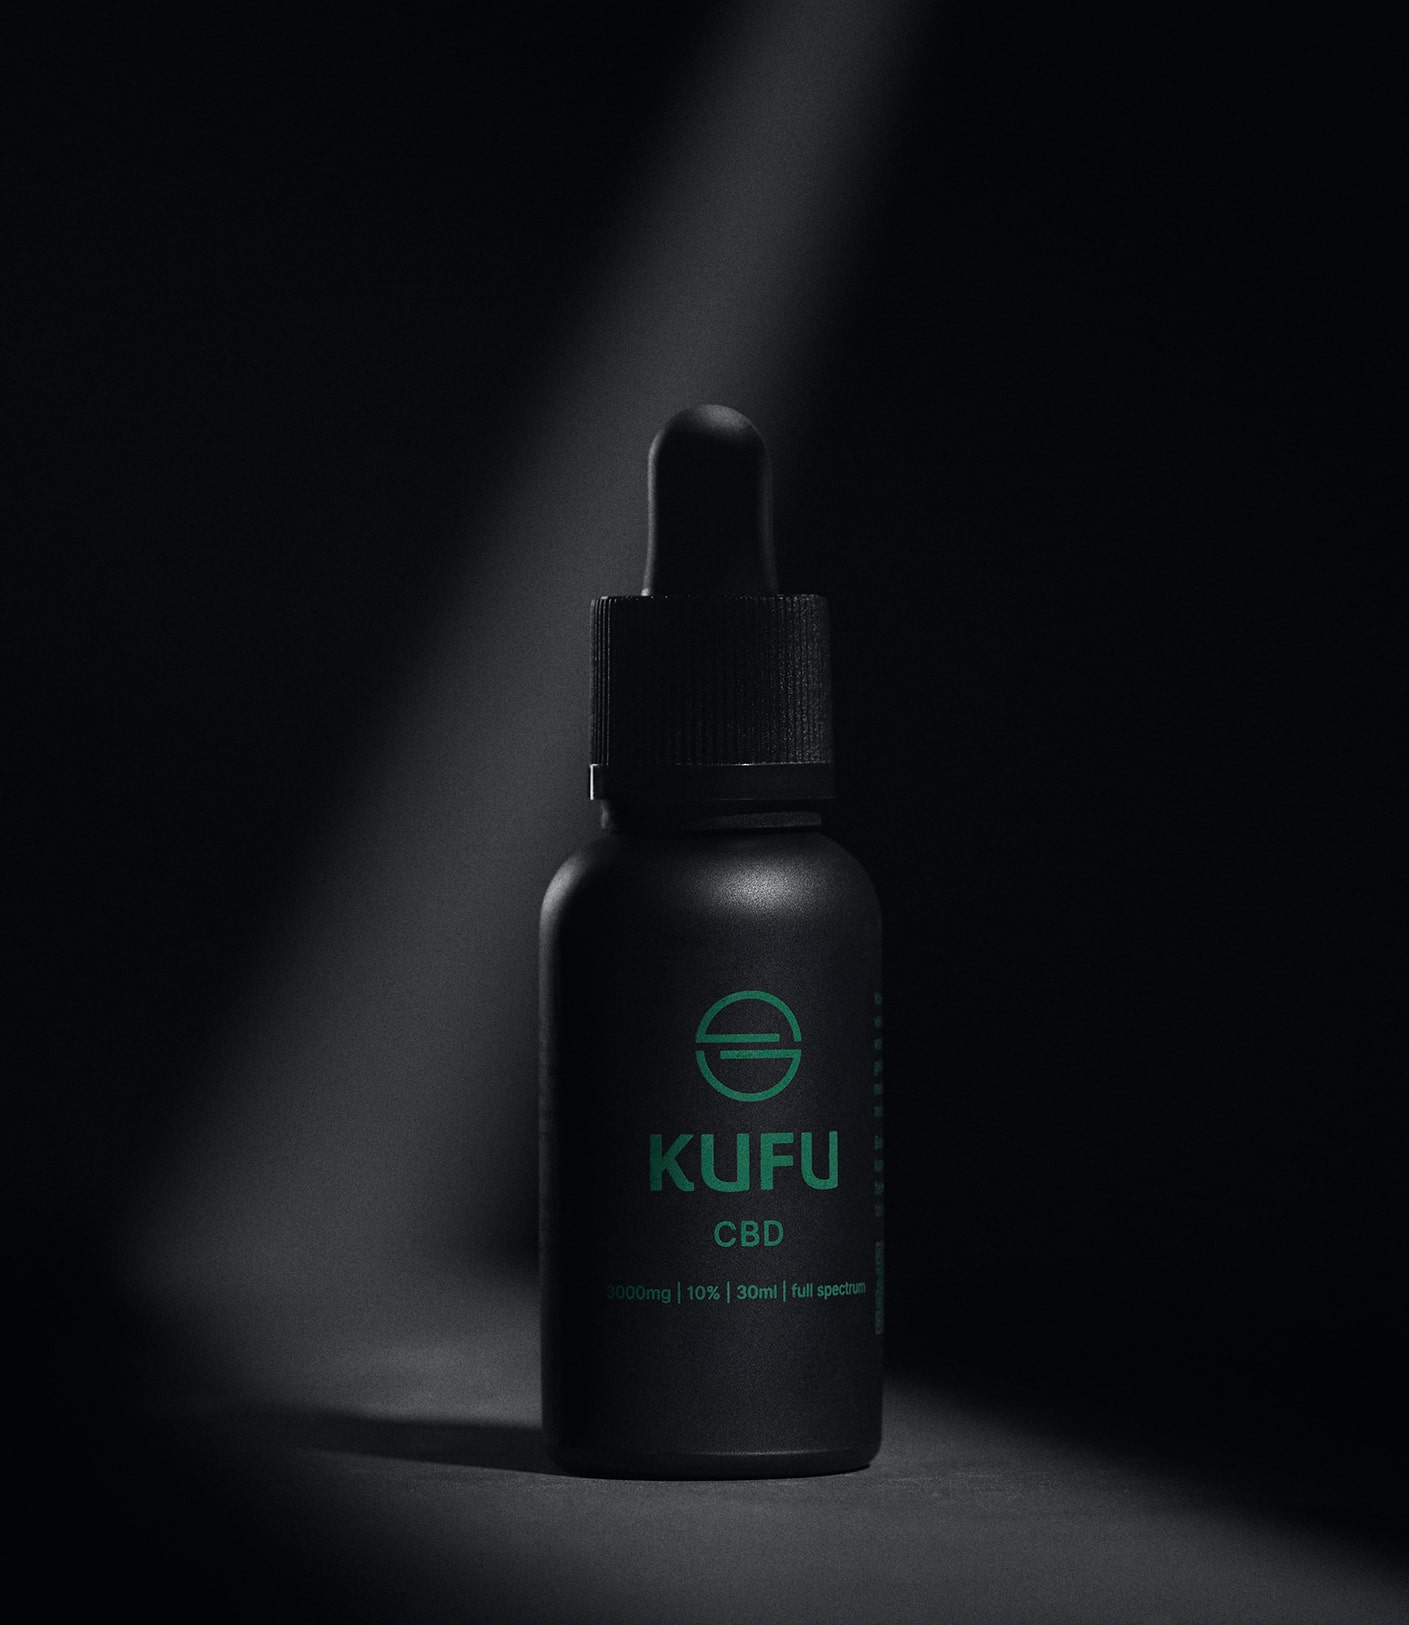 KUFU Black bottle on a black background, with a highlight over